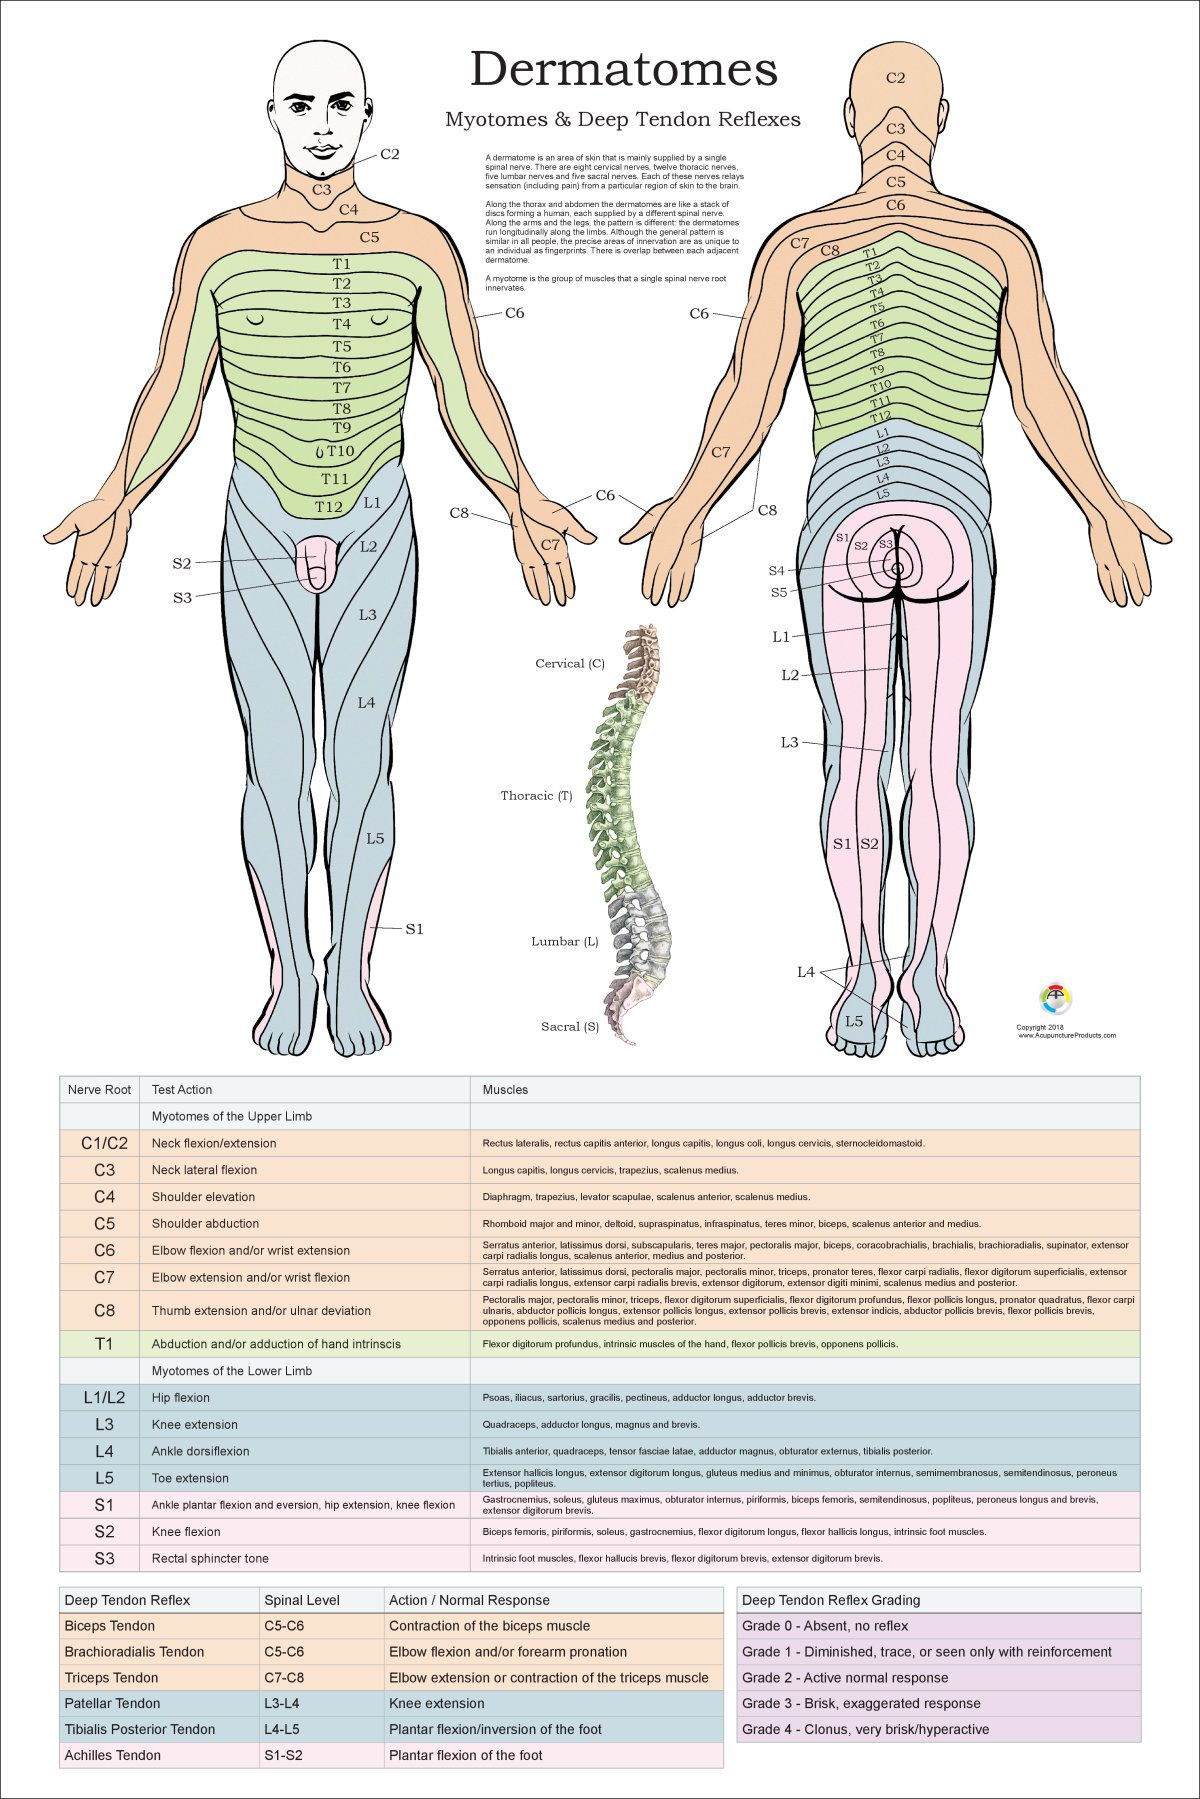 Dermatomes Myotomes And DTR Poster 24 X 36 Chiropractic Etsy Spinal 